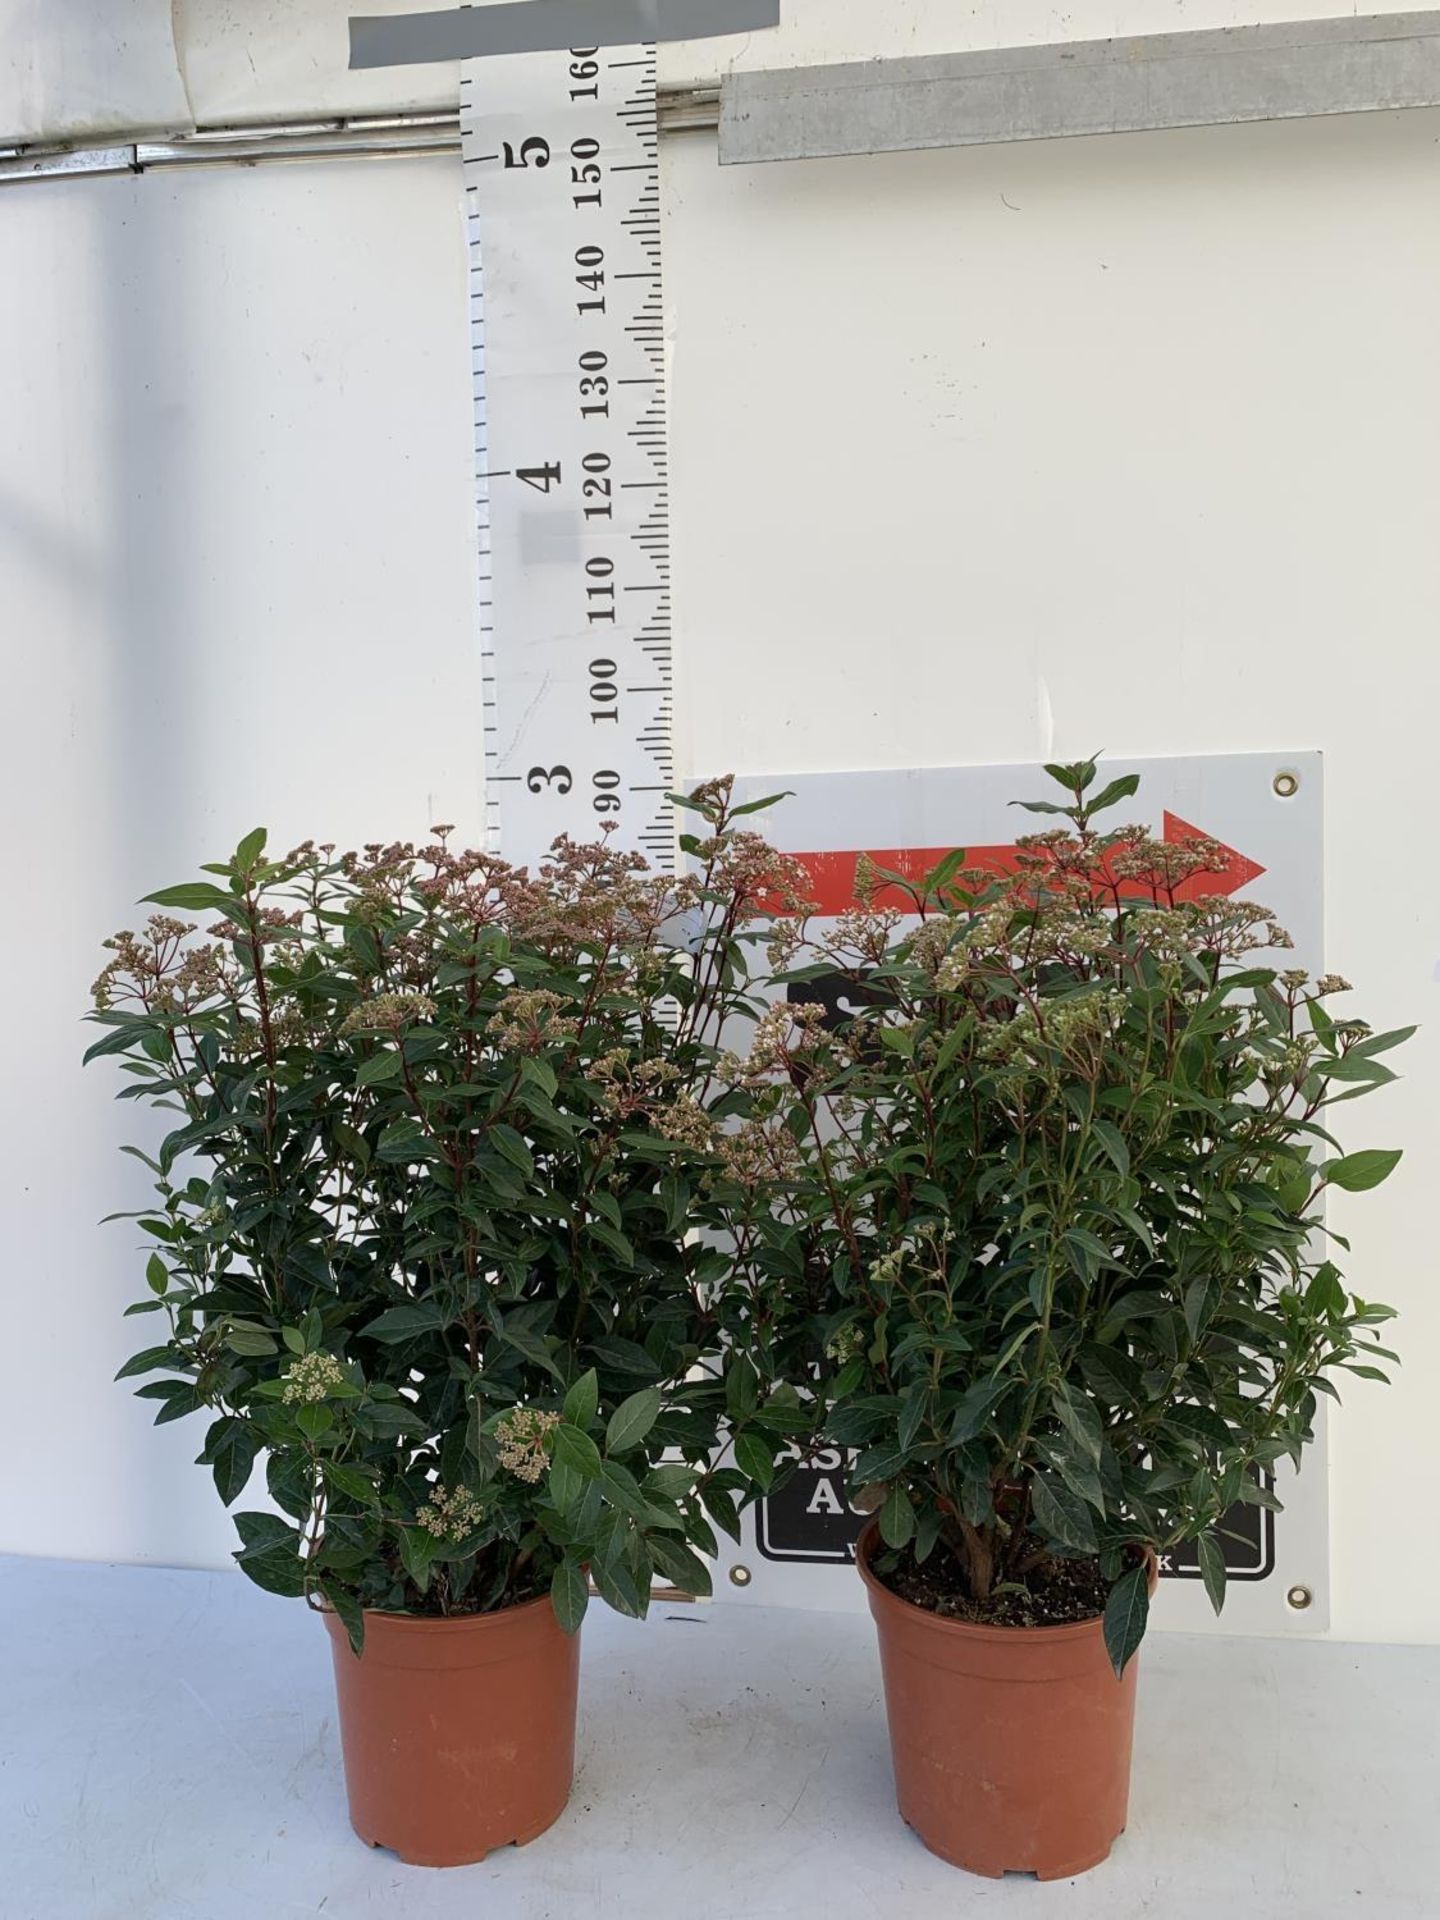 TWO LARGE VIBURNUM TINUS SPIRIT BUSHES APPROX 85CM IN HEIGHT IN 7LTR POTS PLUS VAT TO BE SOLD FOR - Image 2 of 5